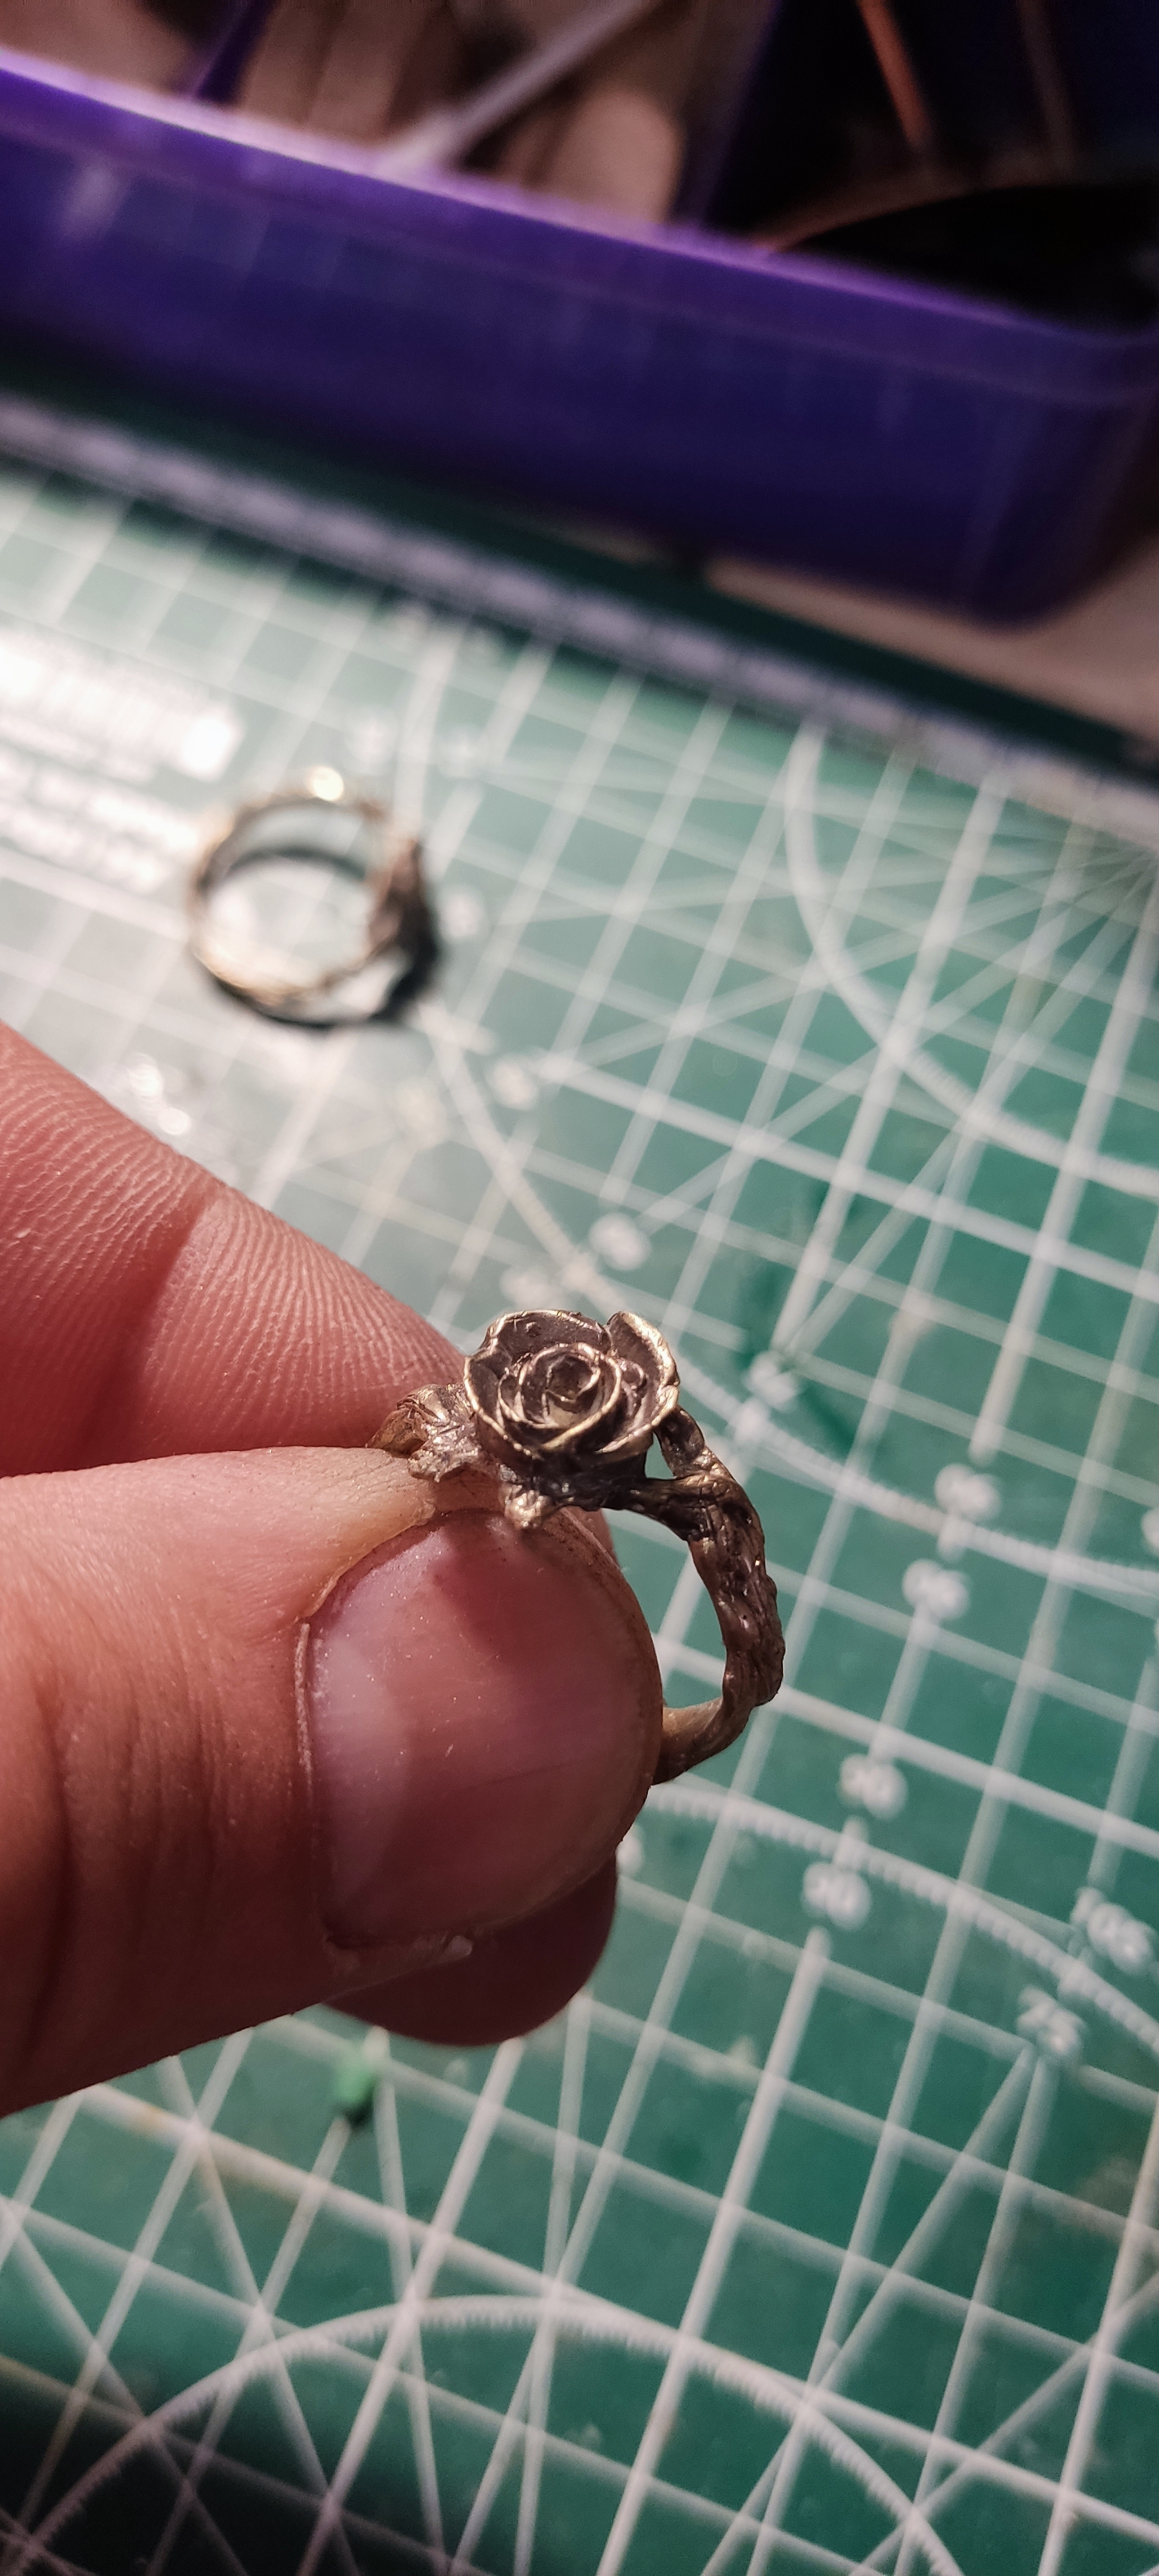 How I poured rings - Longpost, Vertical video, Video, Casting, Jewelcrafting, Hobby, Handmade, Needlework with process, With your own hands, My